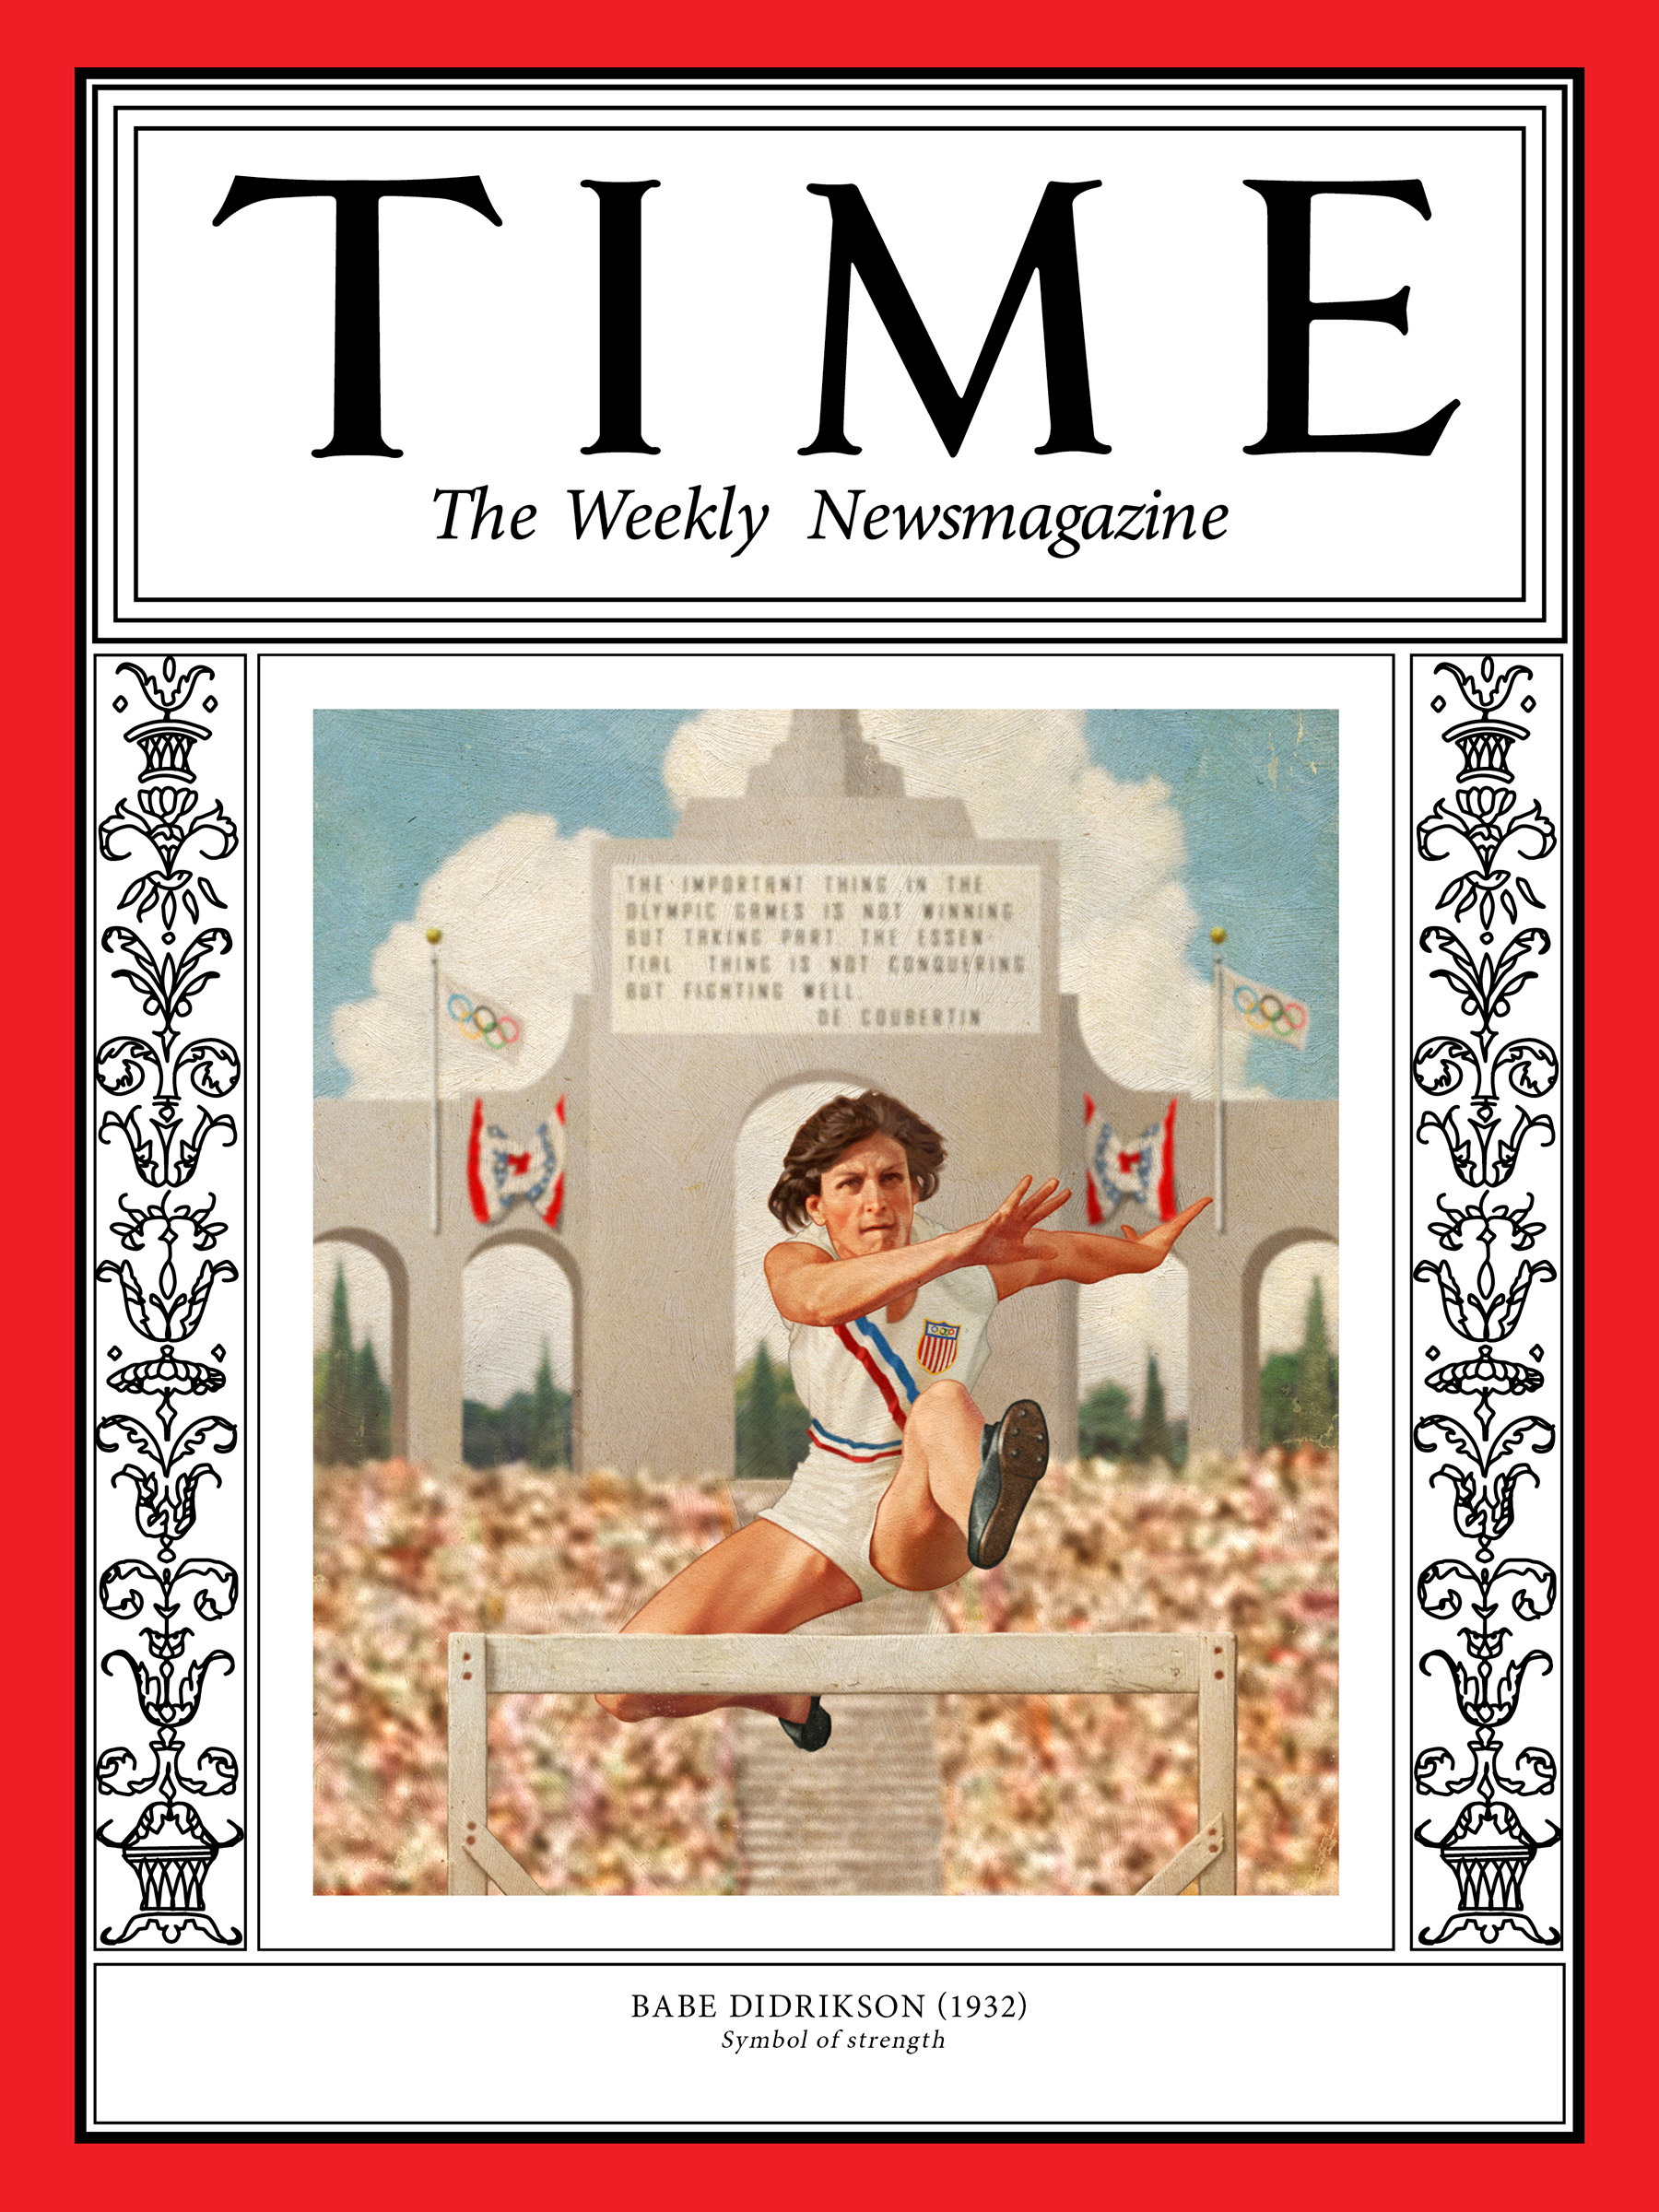 <a href="https://fineartamerica.com/featured/babe-didrikson-1932-time.html"><strong>Buy the cover art→</strong></a> (Illustration by Patrick Faricy for TIME; AP, Getty)